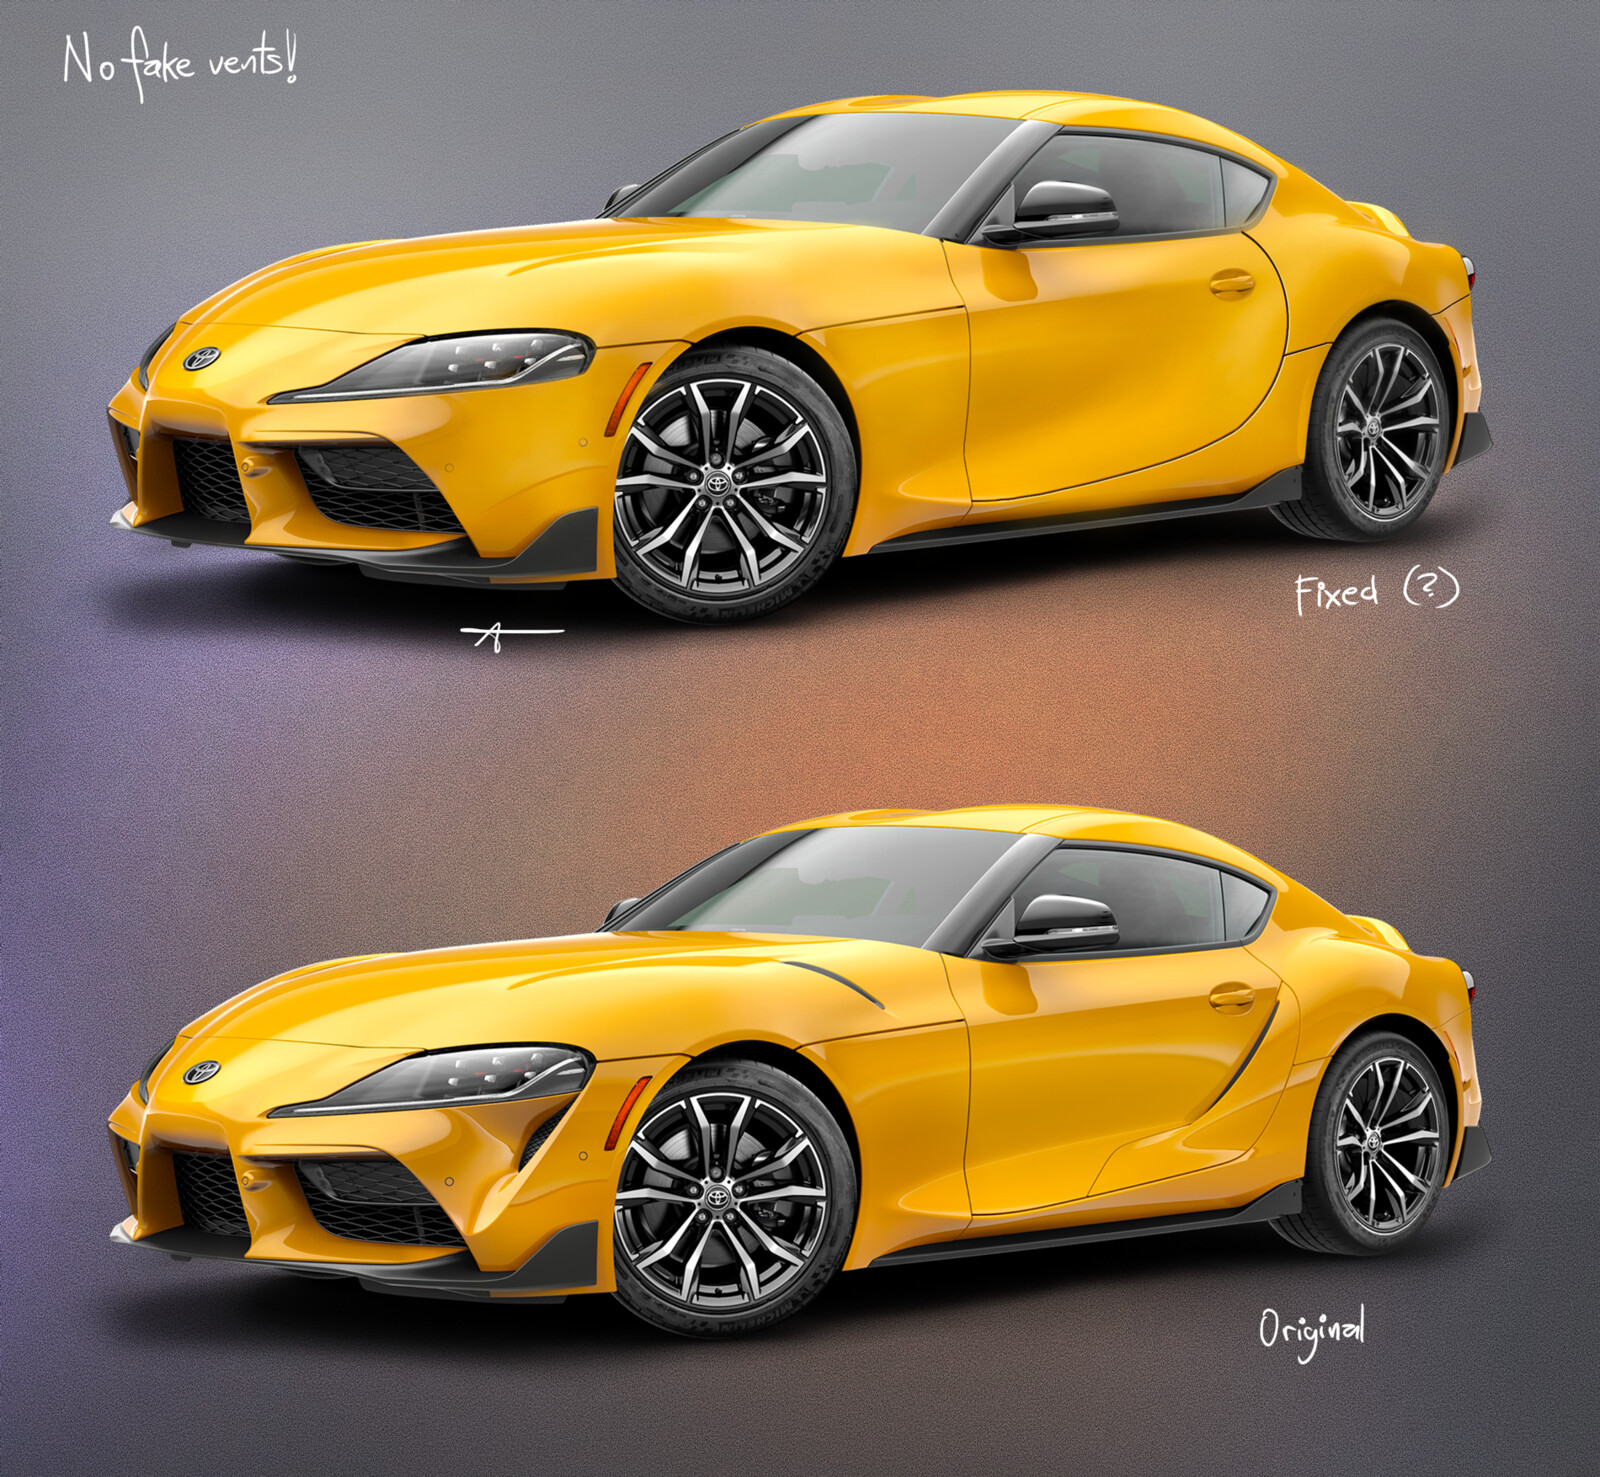 Toyota Supra without most fake vents, made in Procreate.